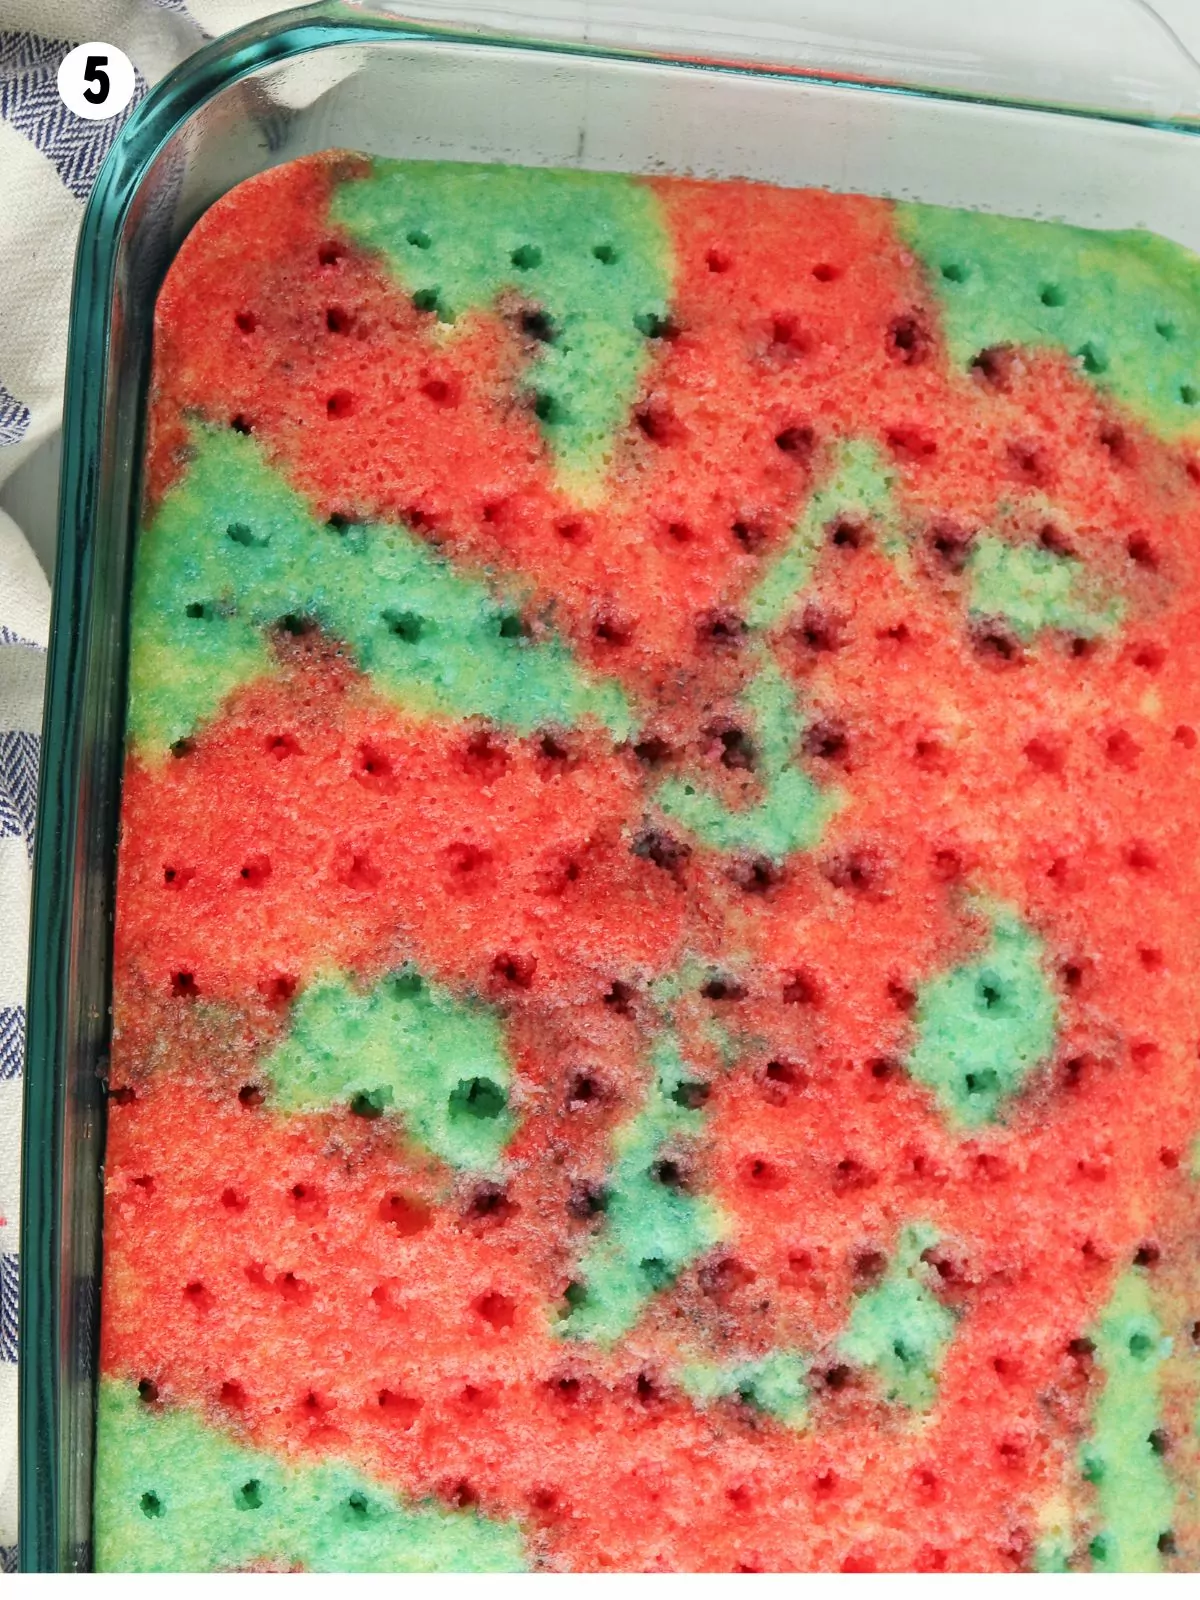 red and blue gelatin poked into a baked cake.